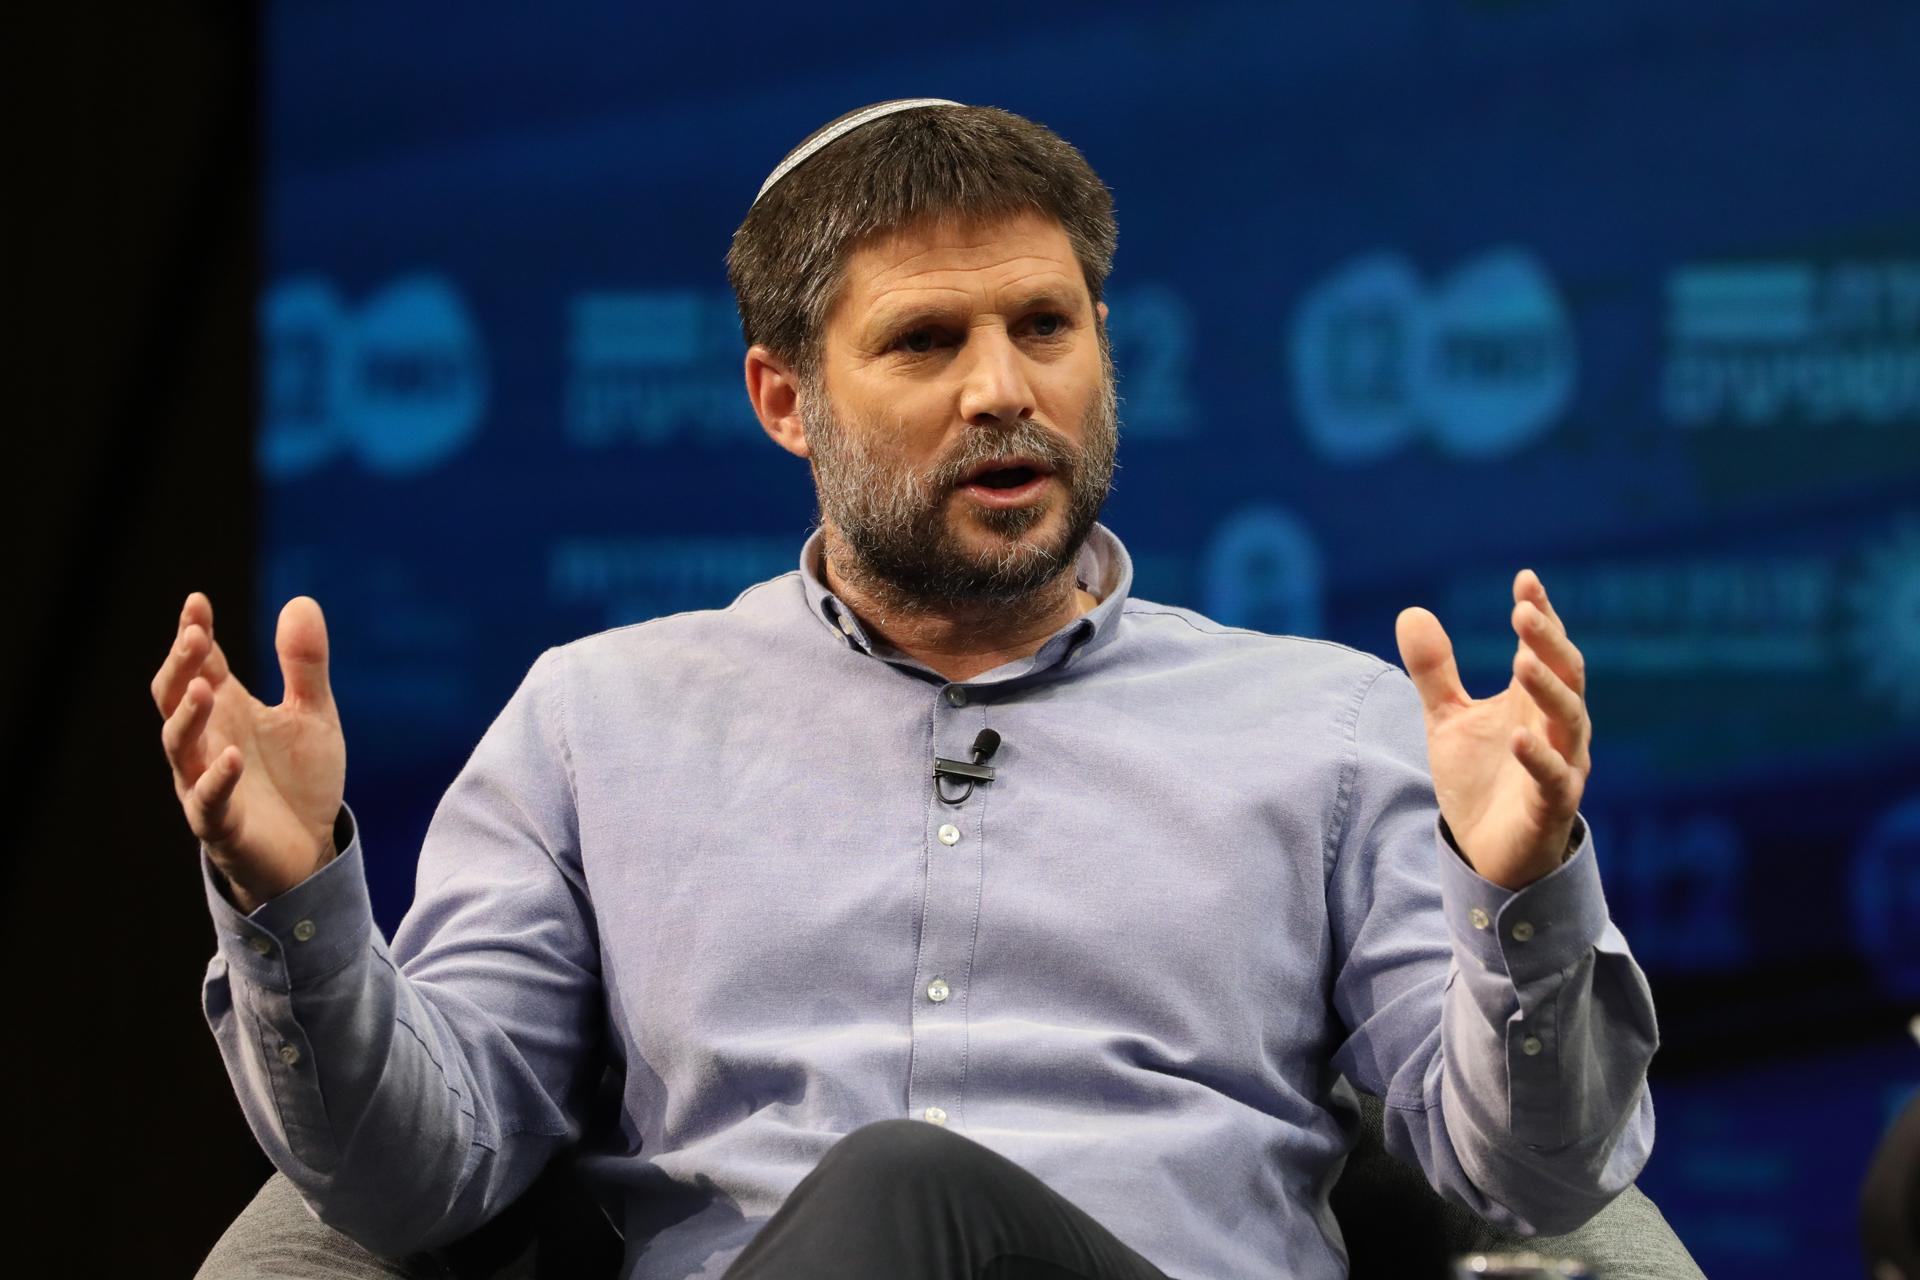 Leader of the right wing Religious Zionist Party Bezalel Smotrich speaks during the 'Influencers Conference' of the Israeli leading News Channel 12 in Jerusalem, Israel, 07 March 2021. EFE-EPA FILE/ABIR SULTAN